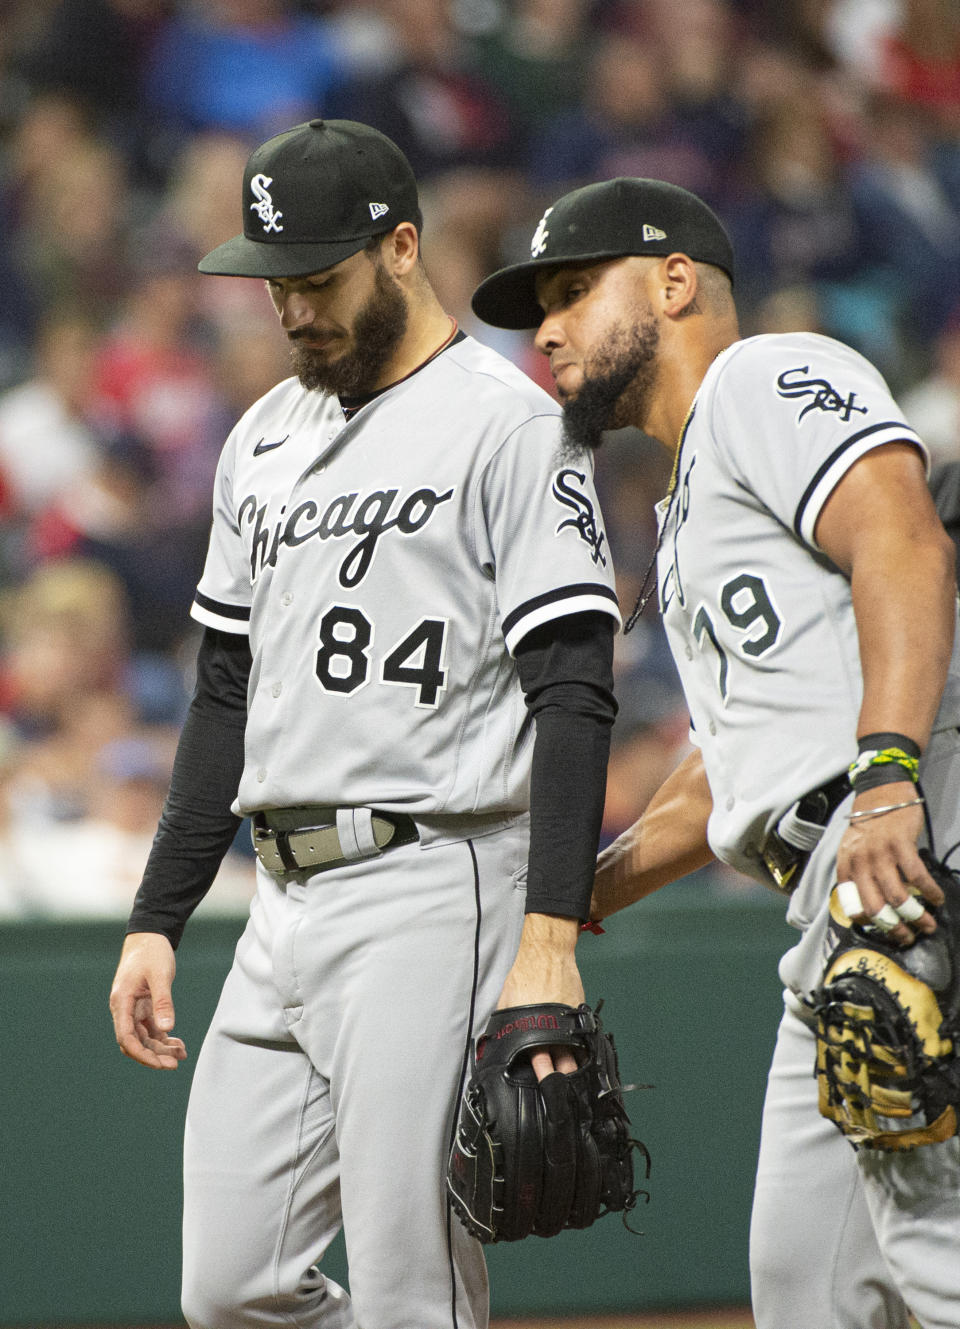 Chicago White Sox starting pitcher Dylan Cease (84) gets a pat from Jose Abreu after getting hit by a ball off the bat of Cleveland Indians' Bradley Zimmer during the sixth inning of a baseball game in Cleveland, Friday, Sept. 24, 2021. (AP Photo/Phil Long)